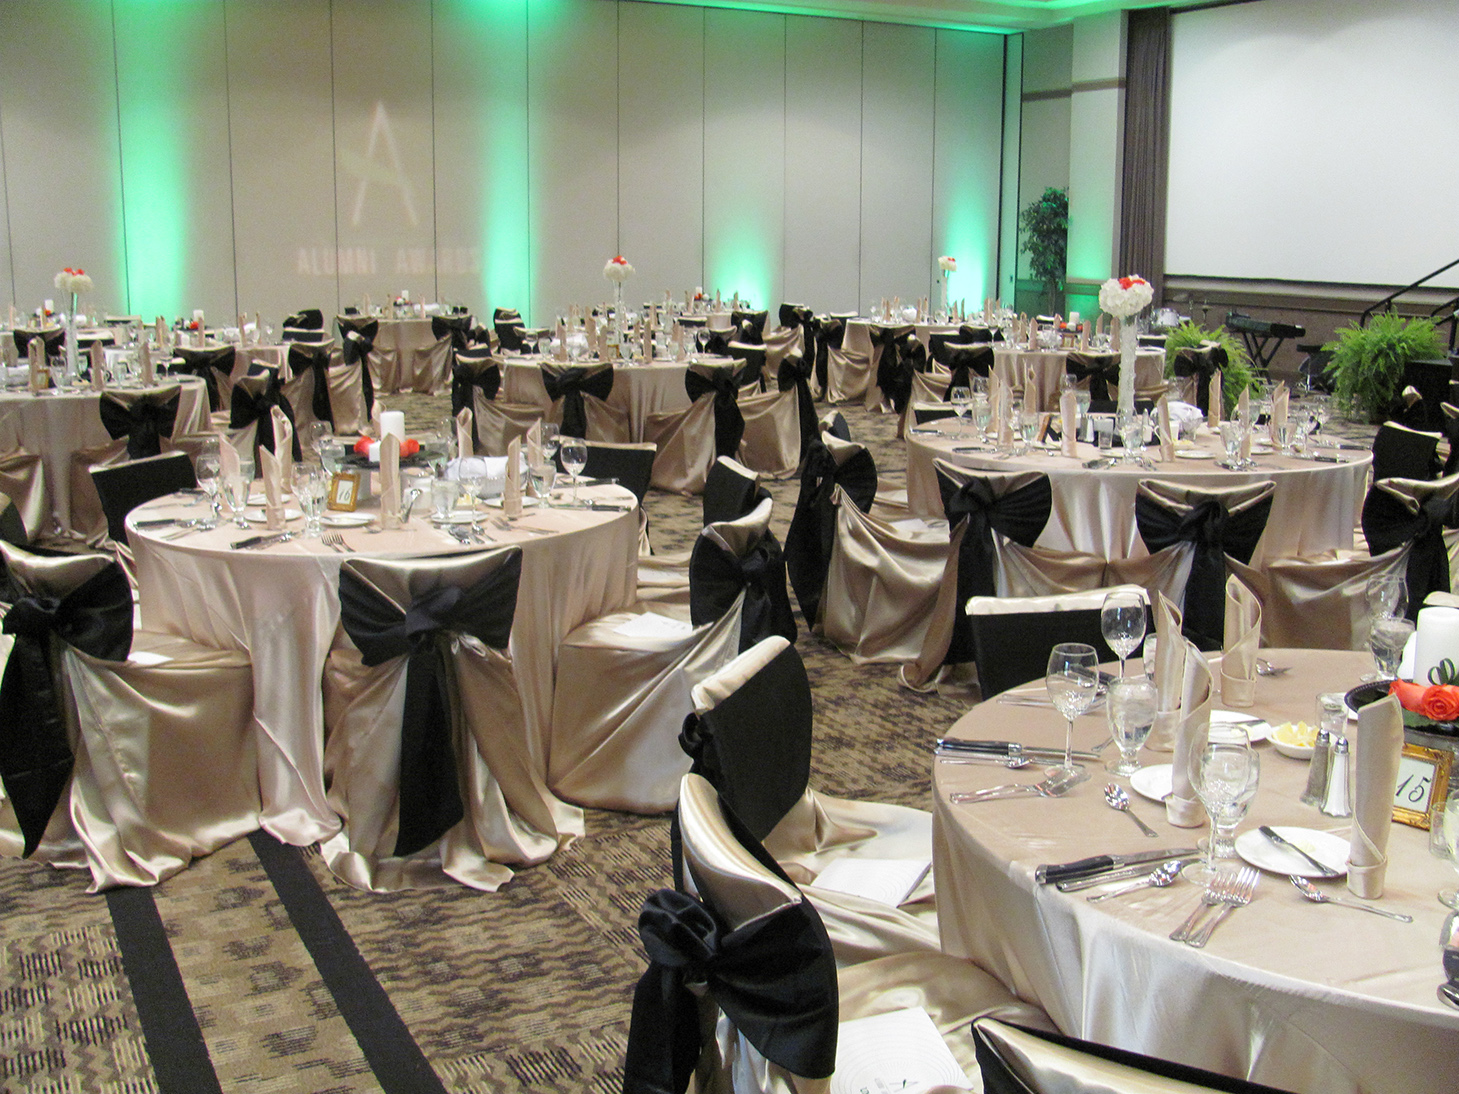 A room decorated for an event at the Gateway Center